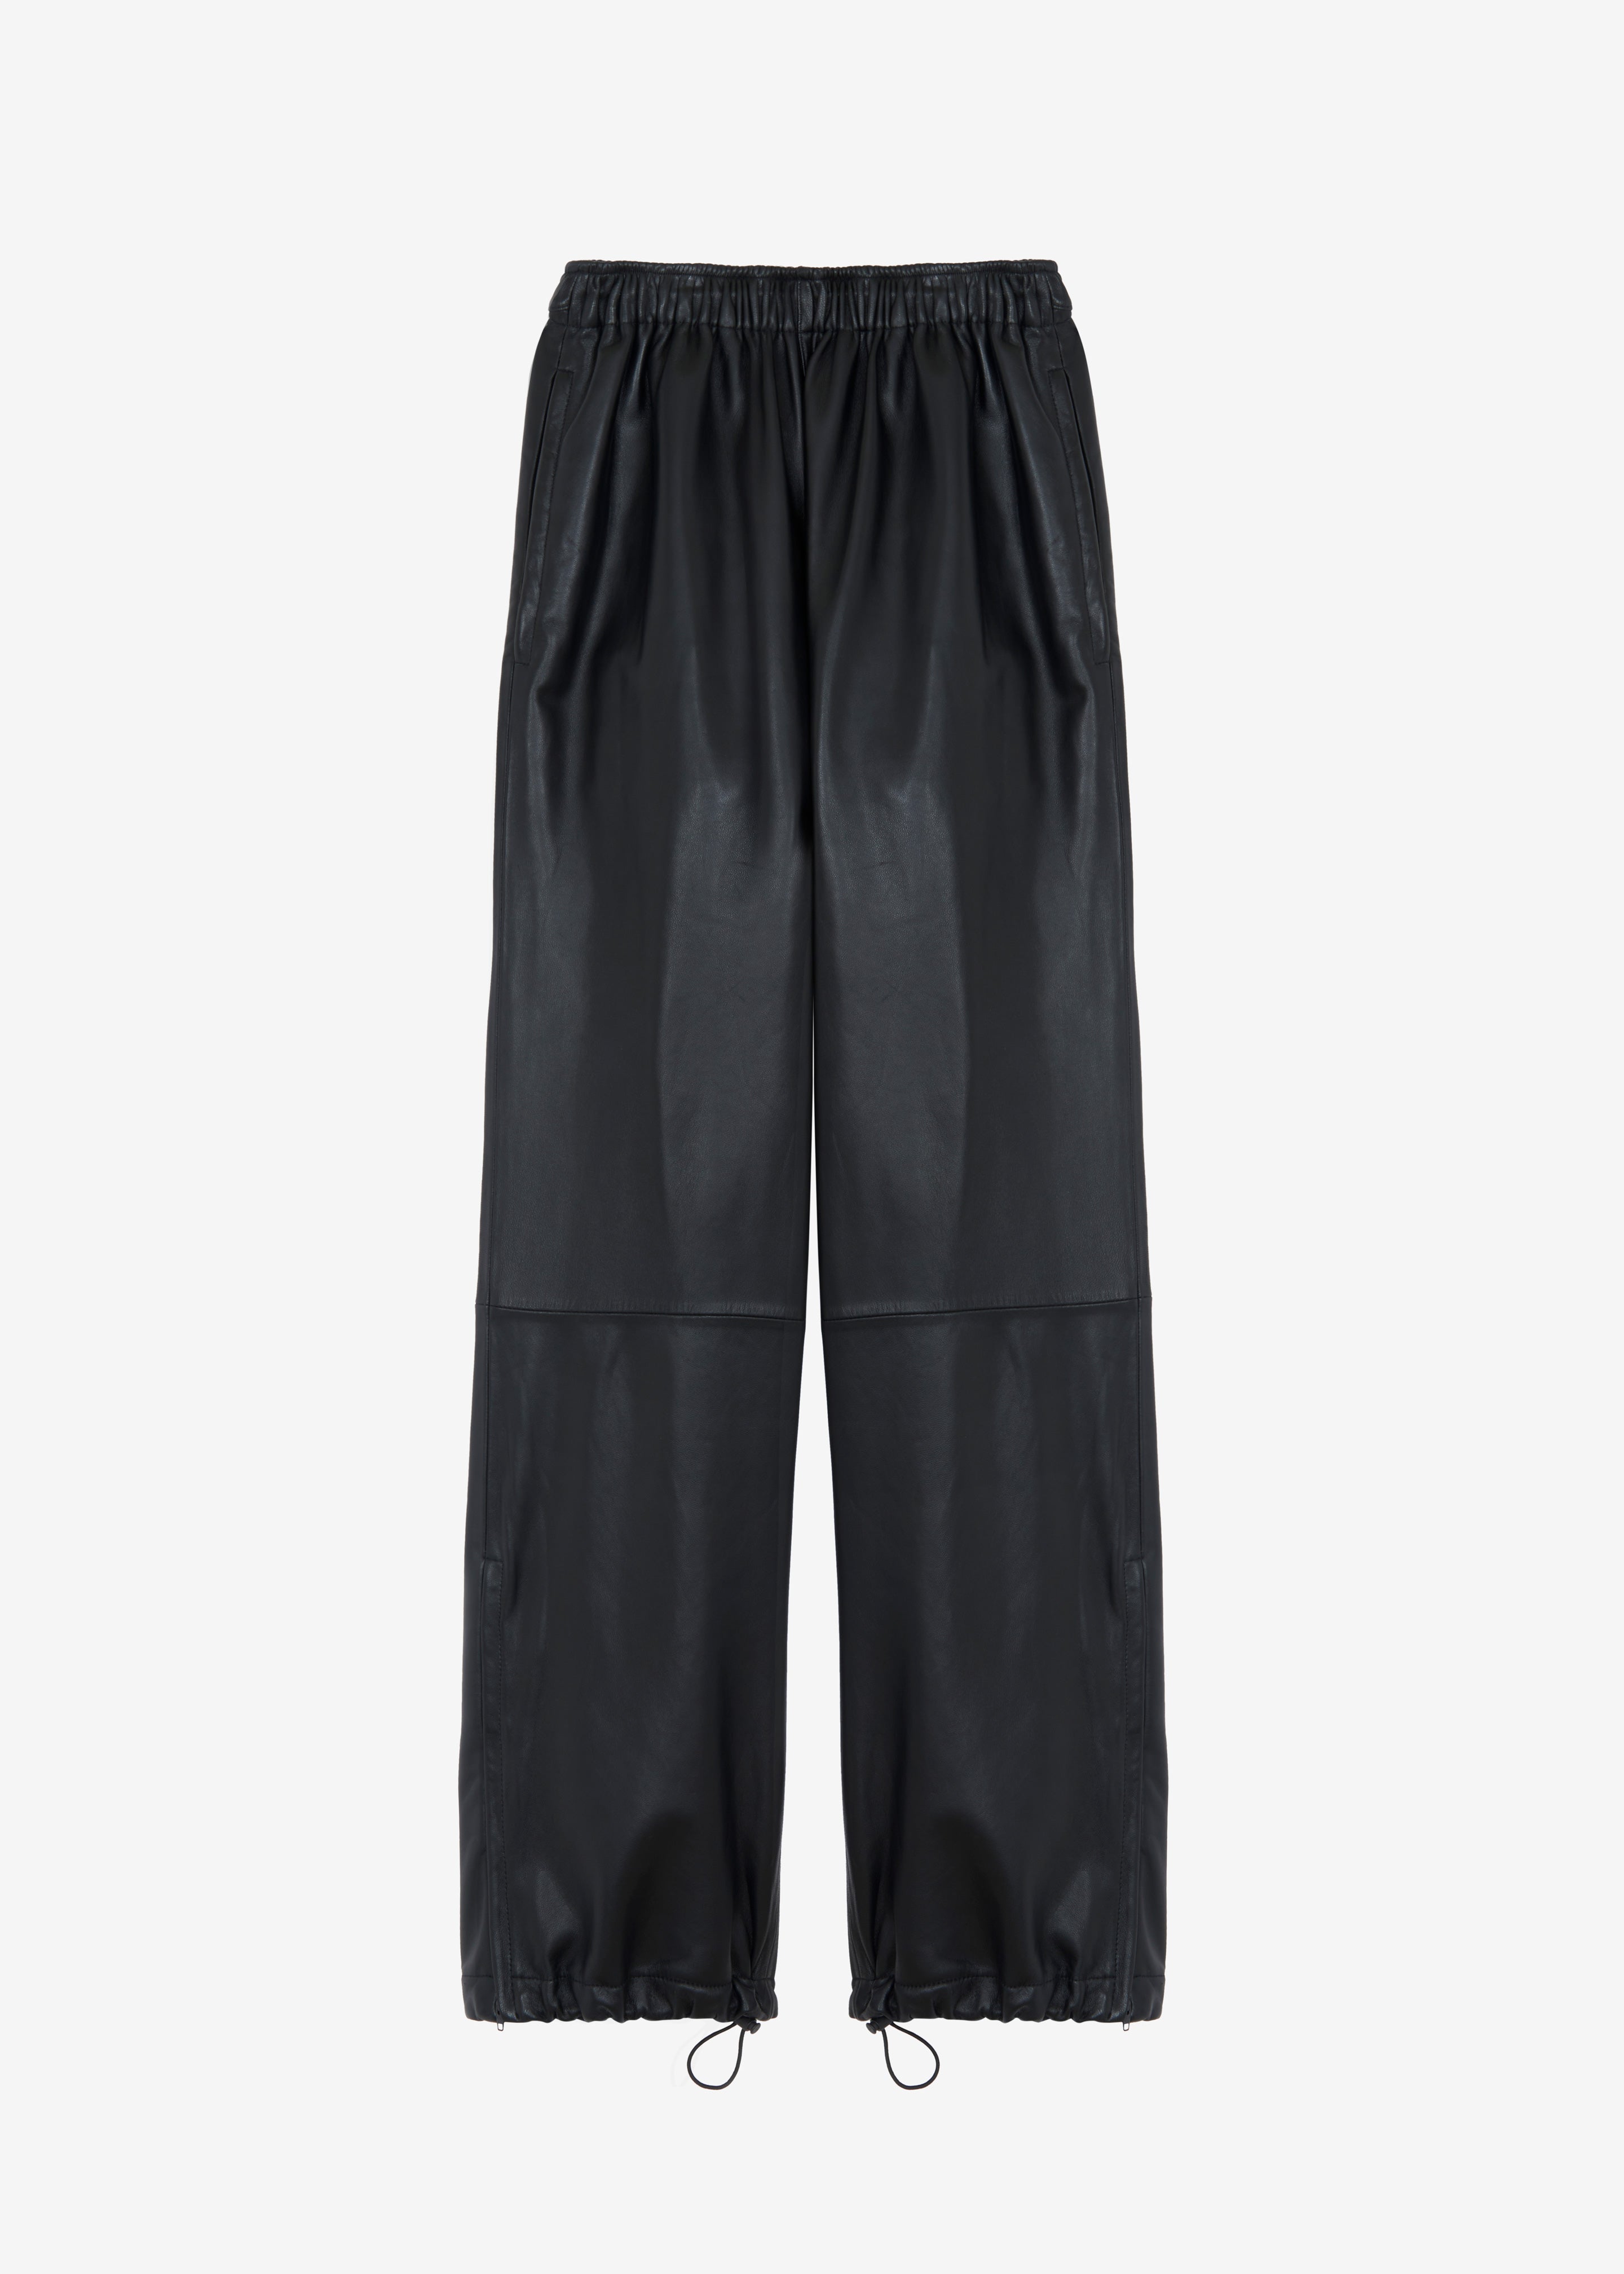 Kevin Leather Trousers - Black - 14